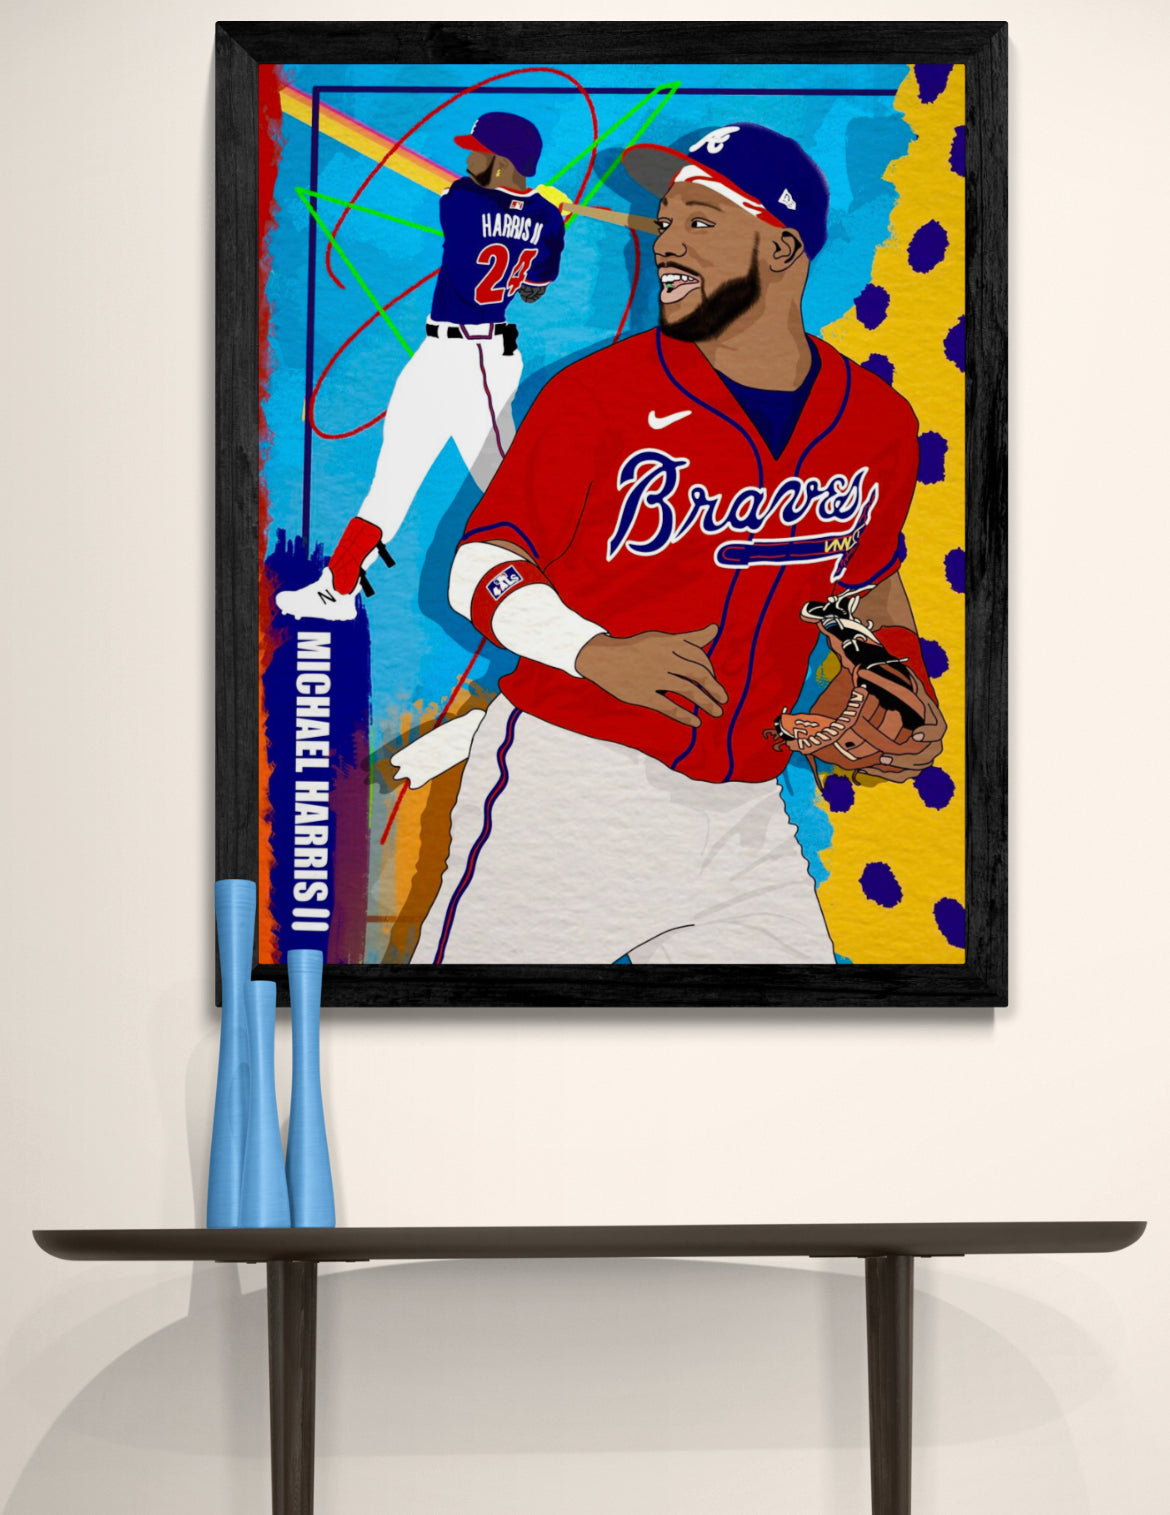  Michael Harris Ii Baseball Poster4 Art Poster for The Bedroom  Living Room Office And Other Environment Frame:20x30inch(50x75cm): Posters  & Prints